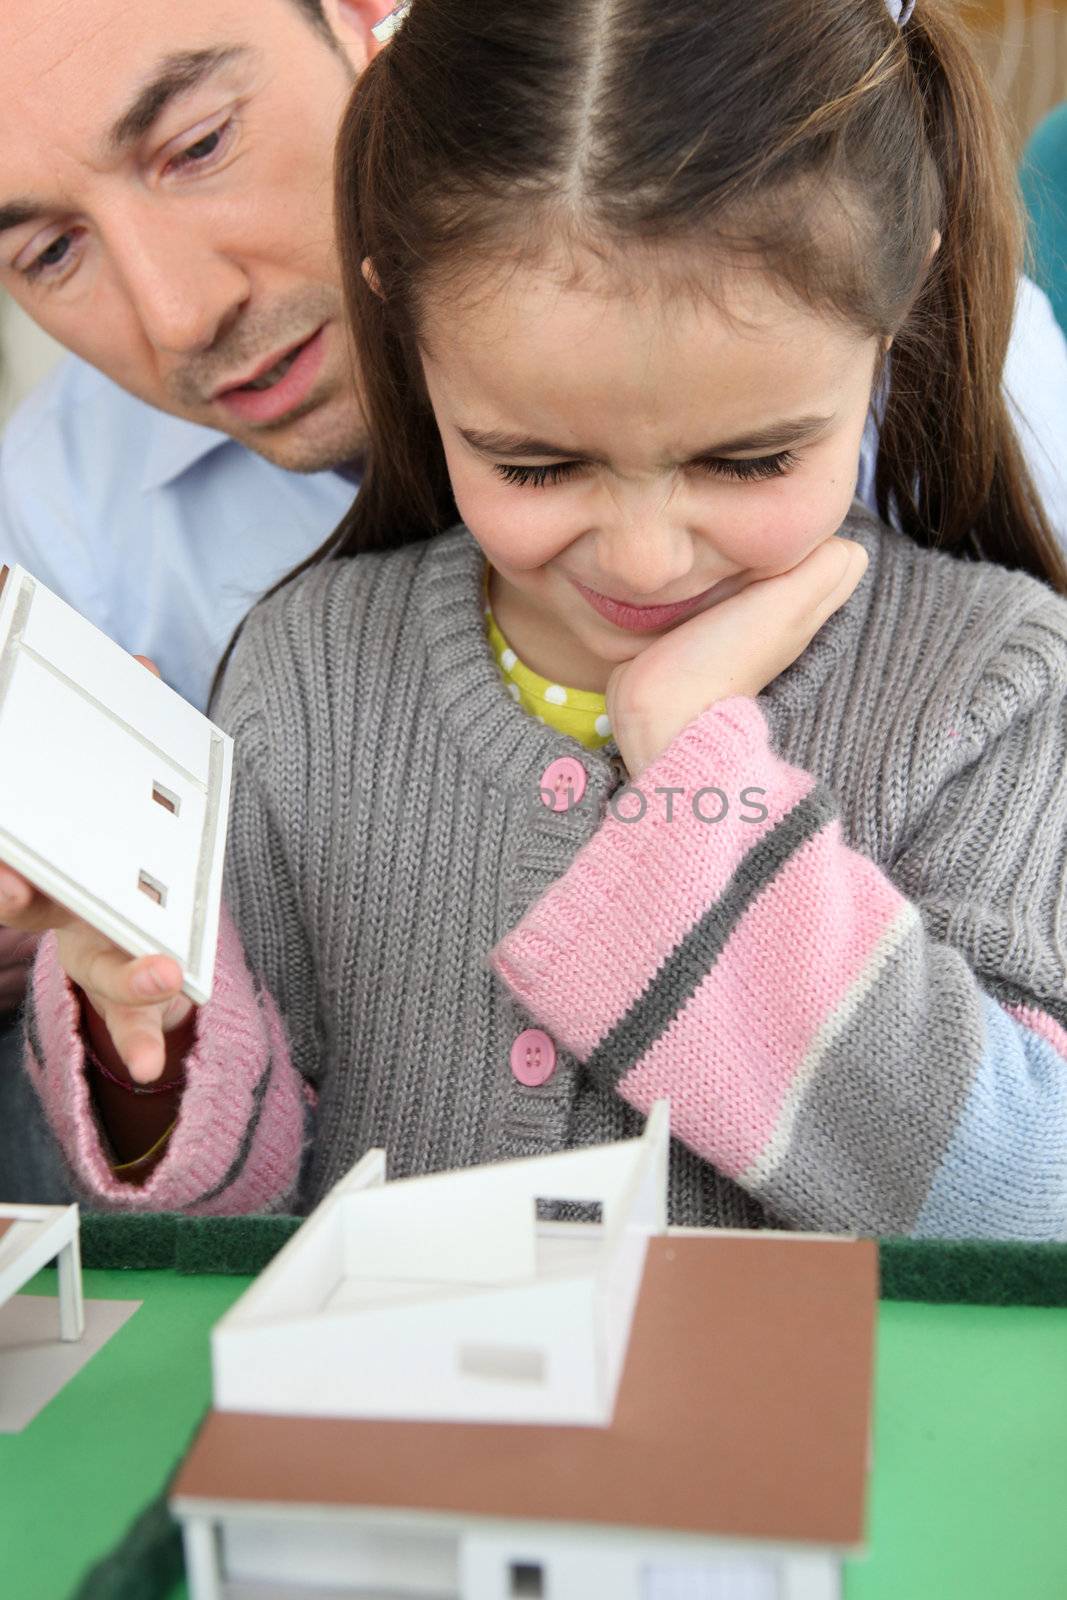 Father and daughter looking at a house model